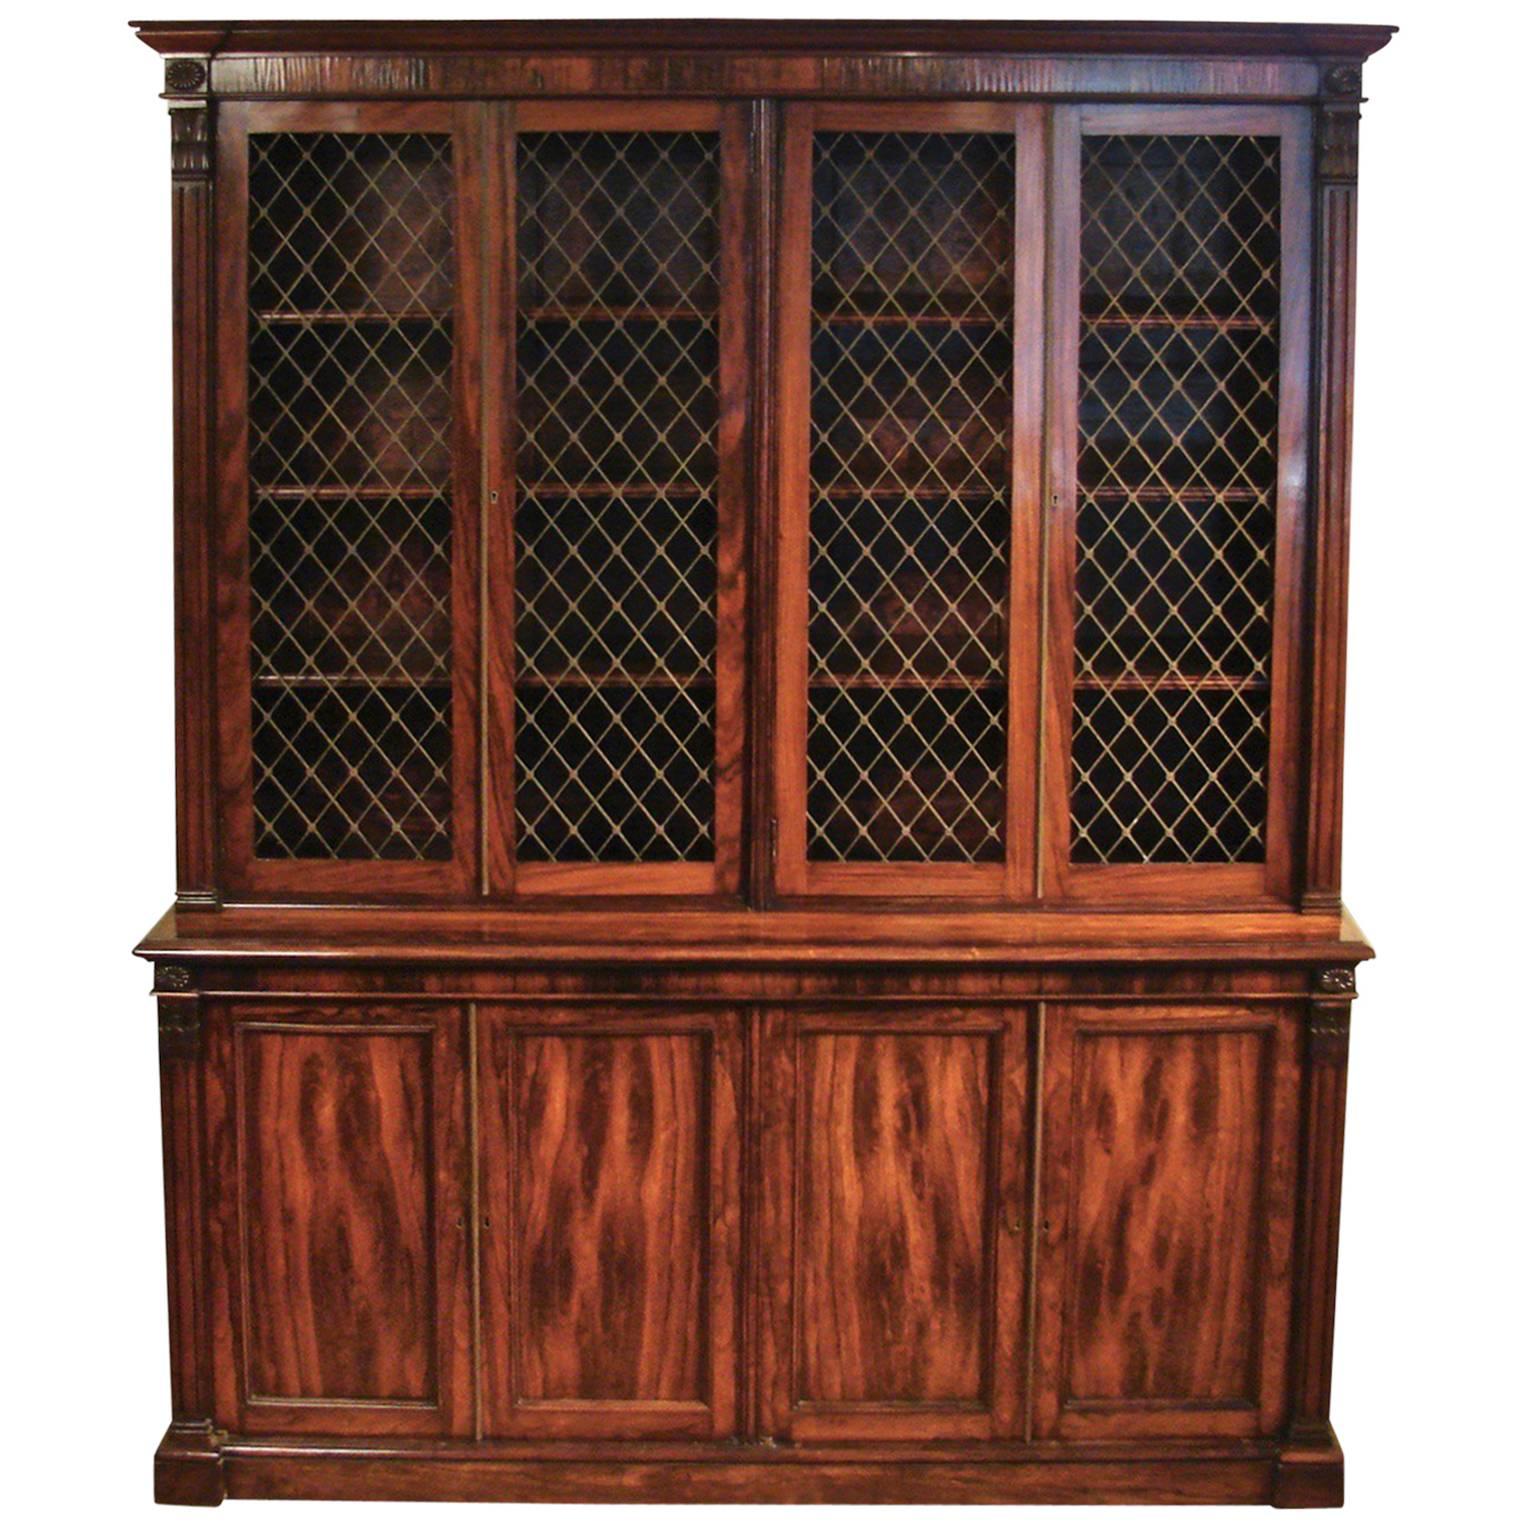 Regency Bookcase with Brass Grill Doors over Cabinets with Panelled Doors